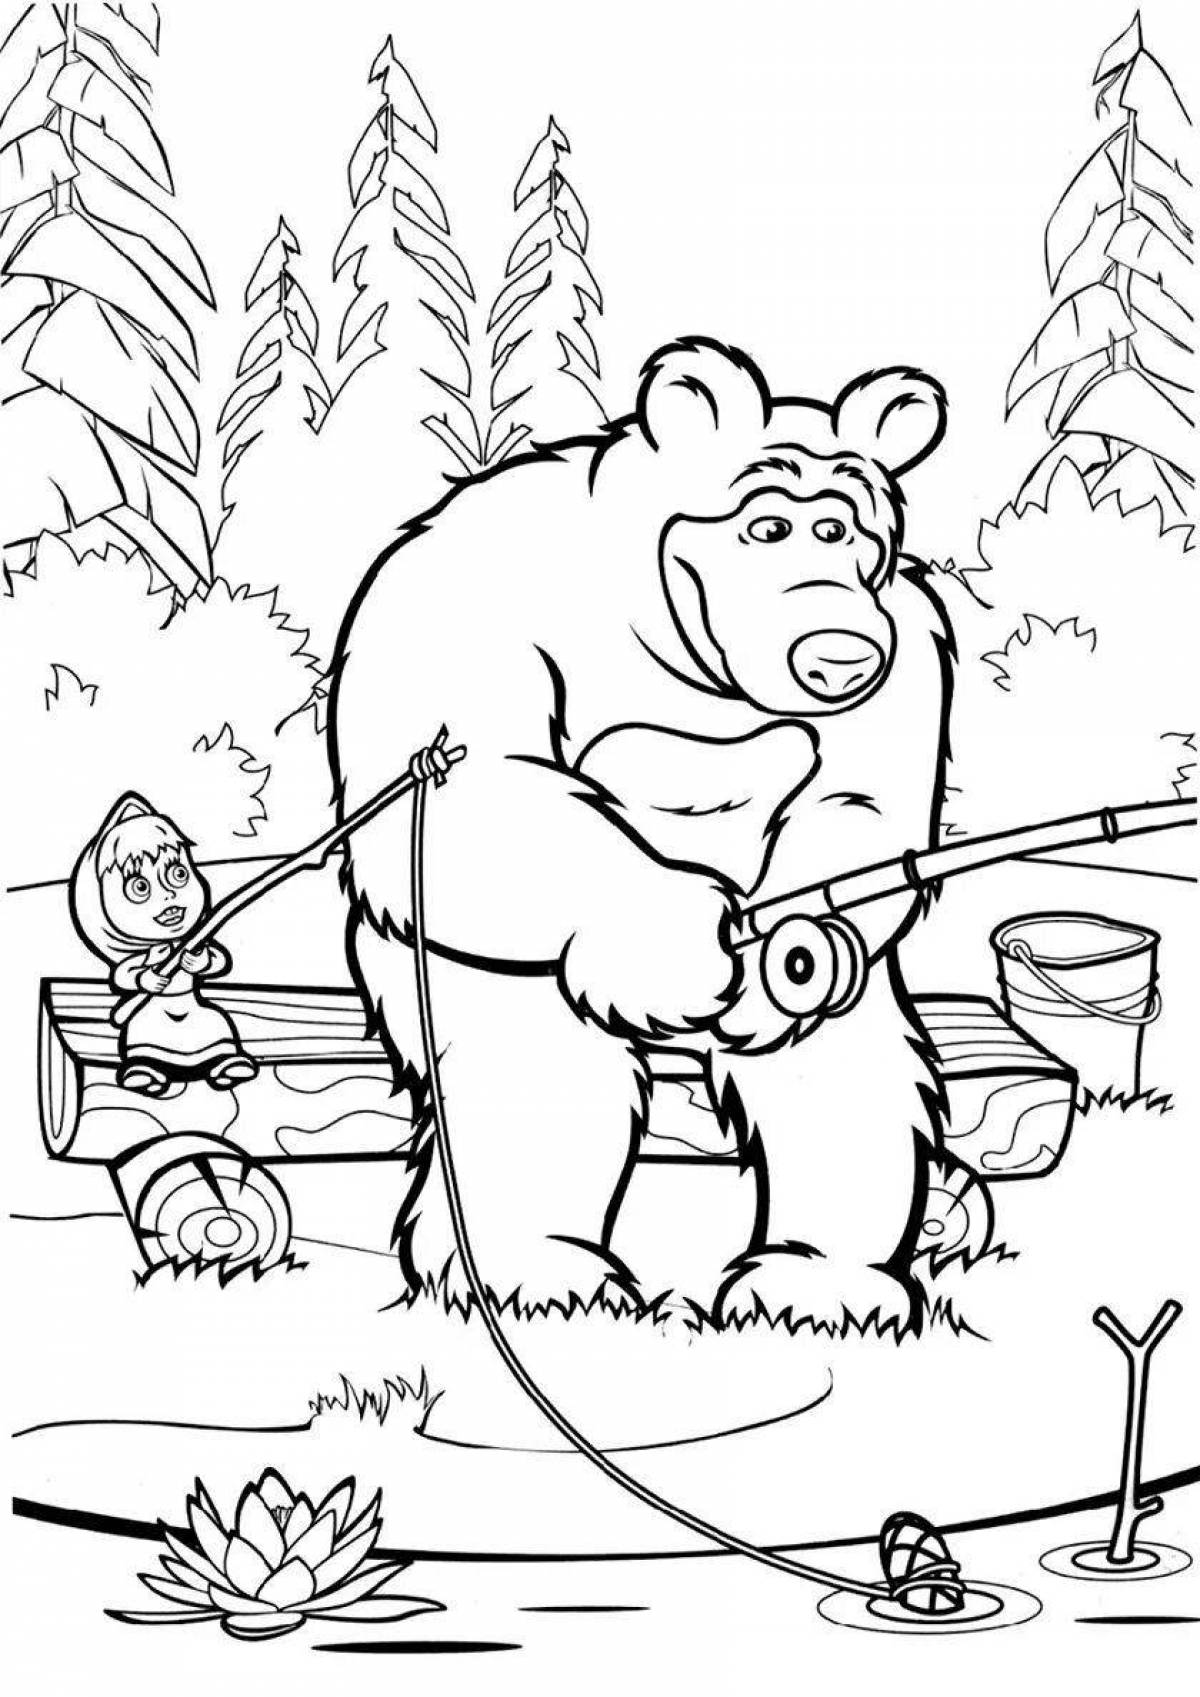 Glowing bear coloring page